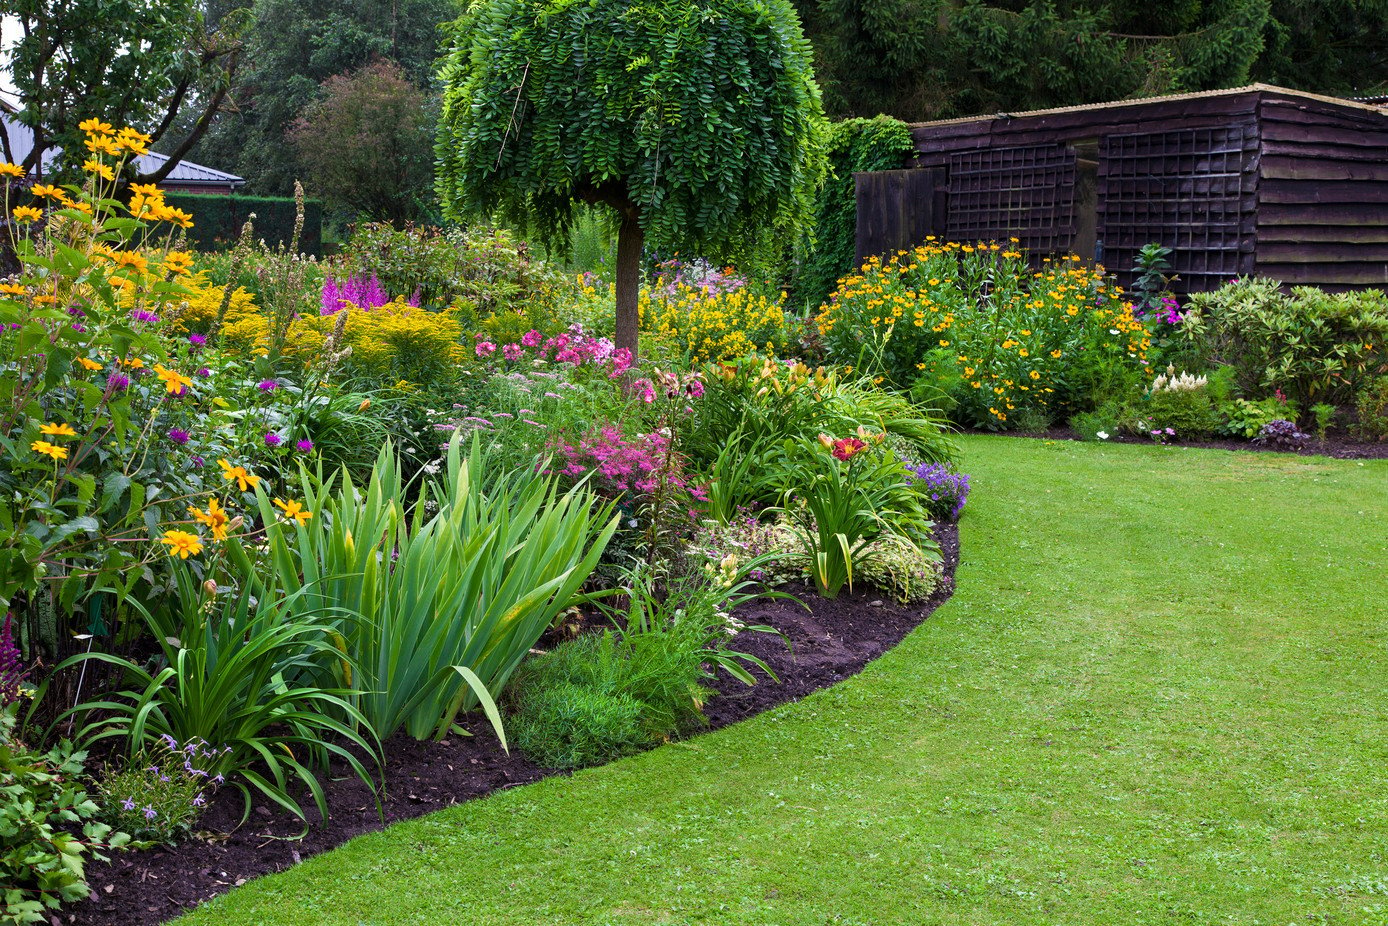 Creative Ideas To Landscape A Slope, How To Landscape A Steep Slope On Budget